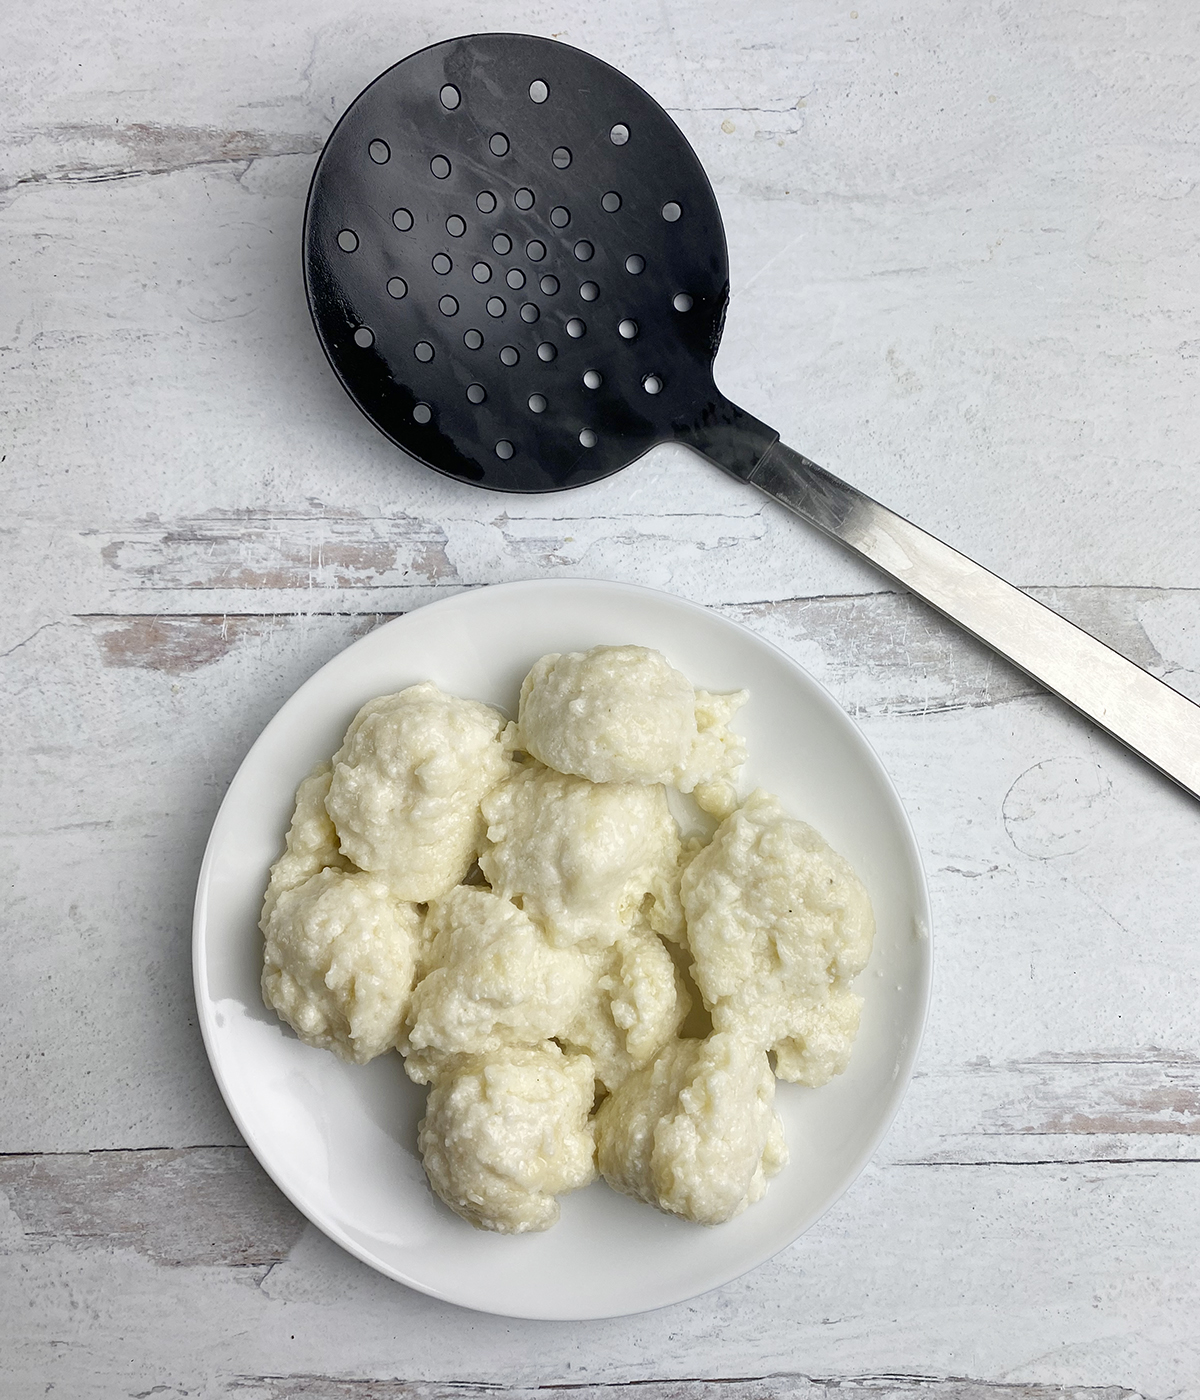 Cooked ricotta dumplings on a plate with a slotted spoon nearby.